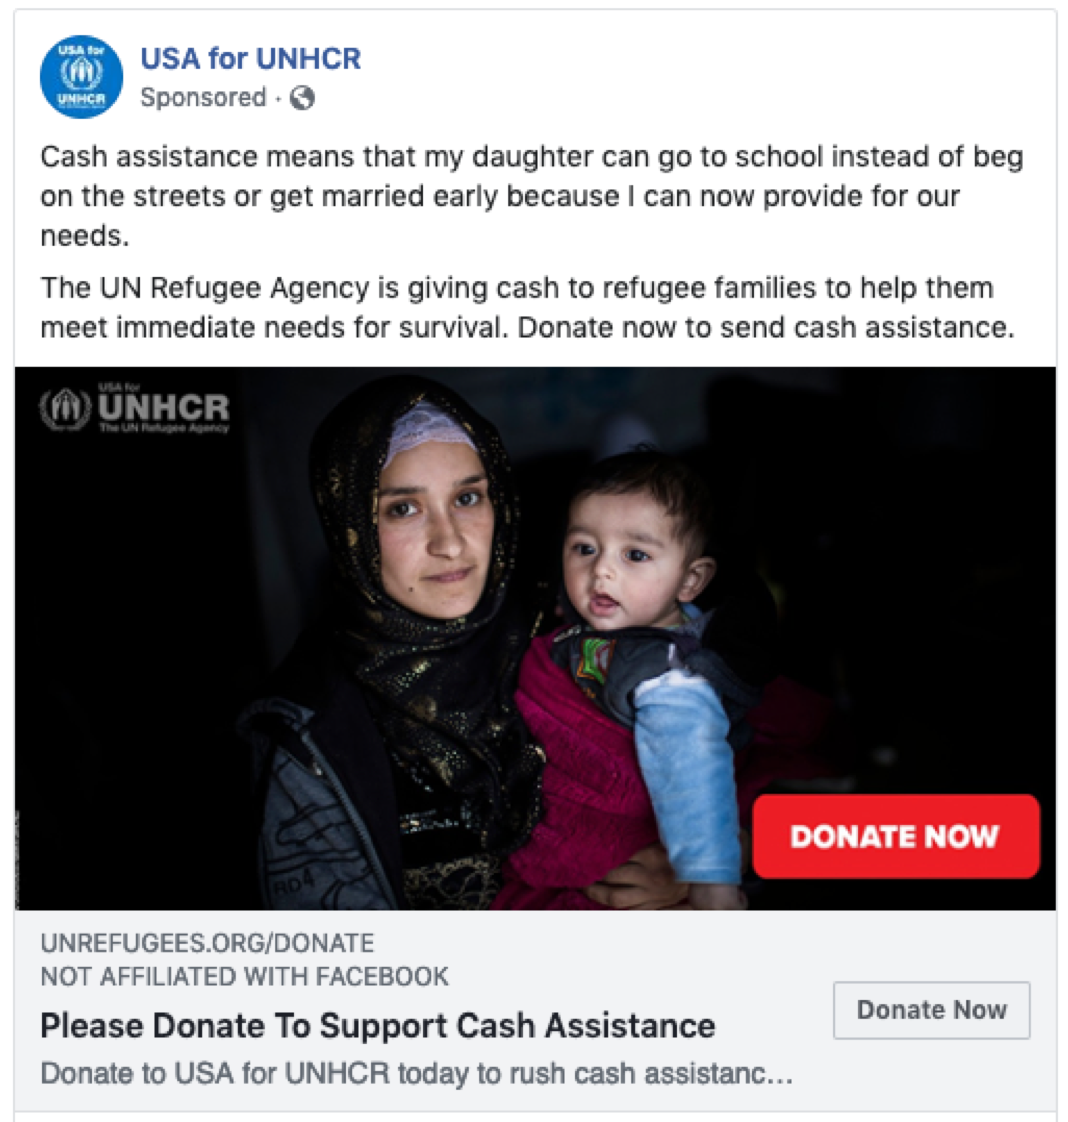 Screenshot of a Facebook post from USA for UNHCR asking for donations